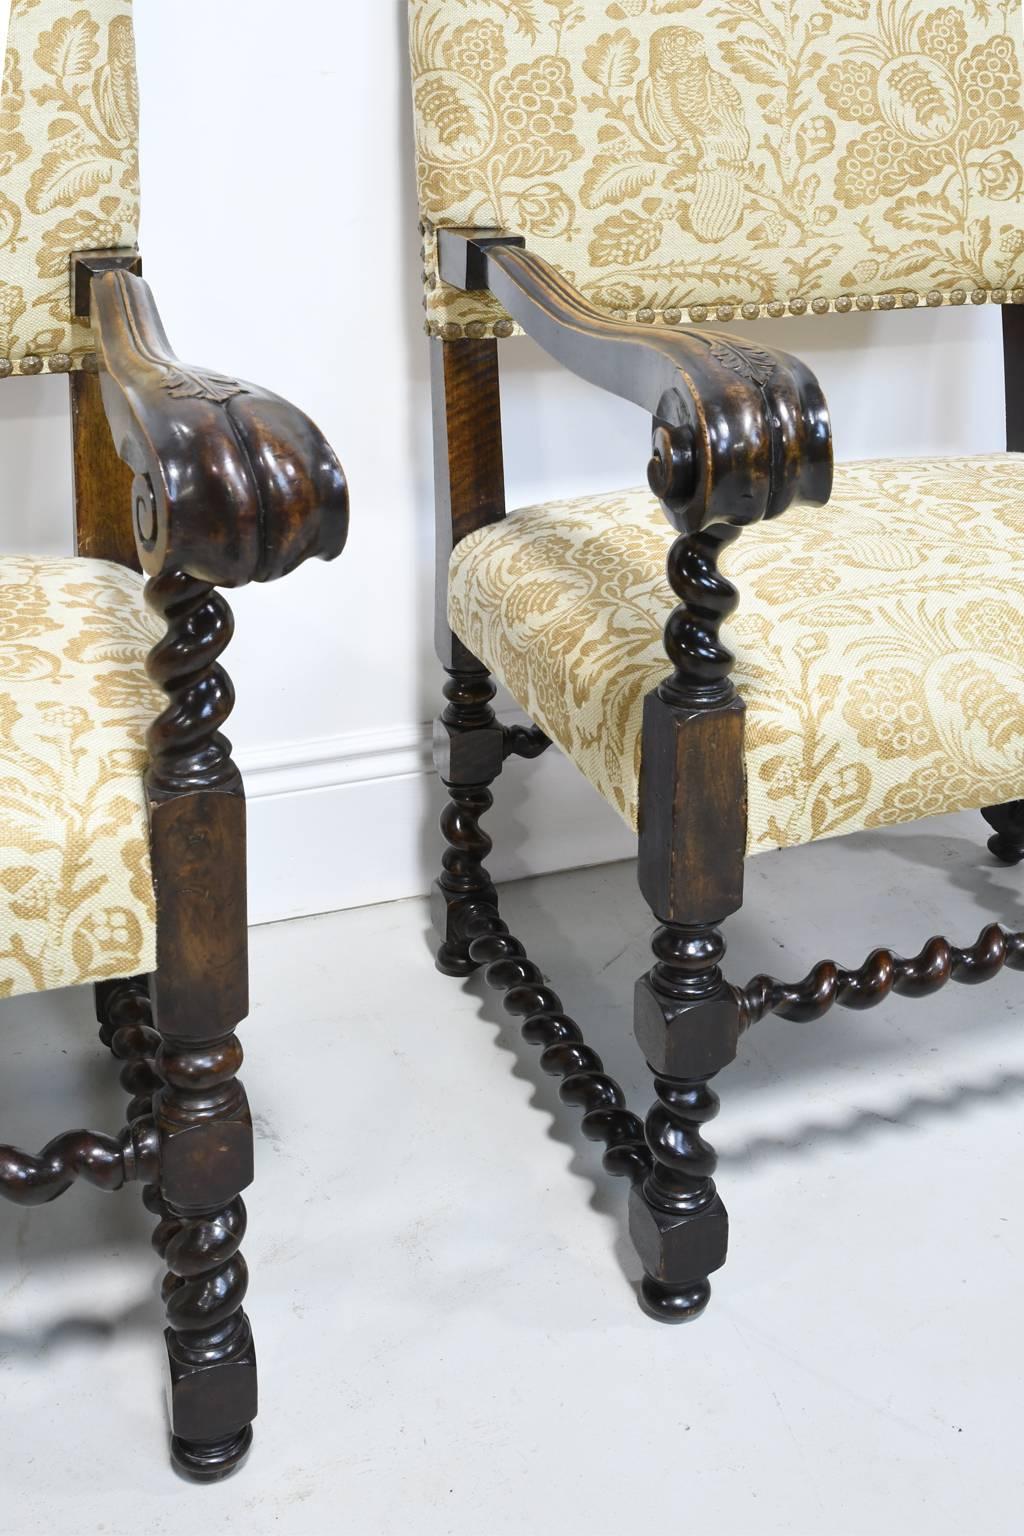 A fine pair of Jacobean Style throne chairs from the late 1800s with carved royal plumes, block and barley turnings, and upholstered back and seat. A very similar throne chair is seen in the new PBS series 